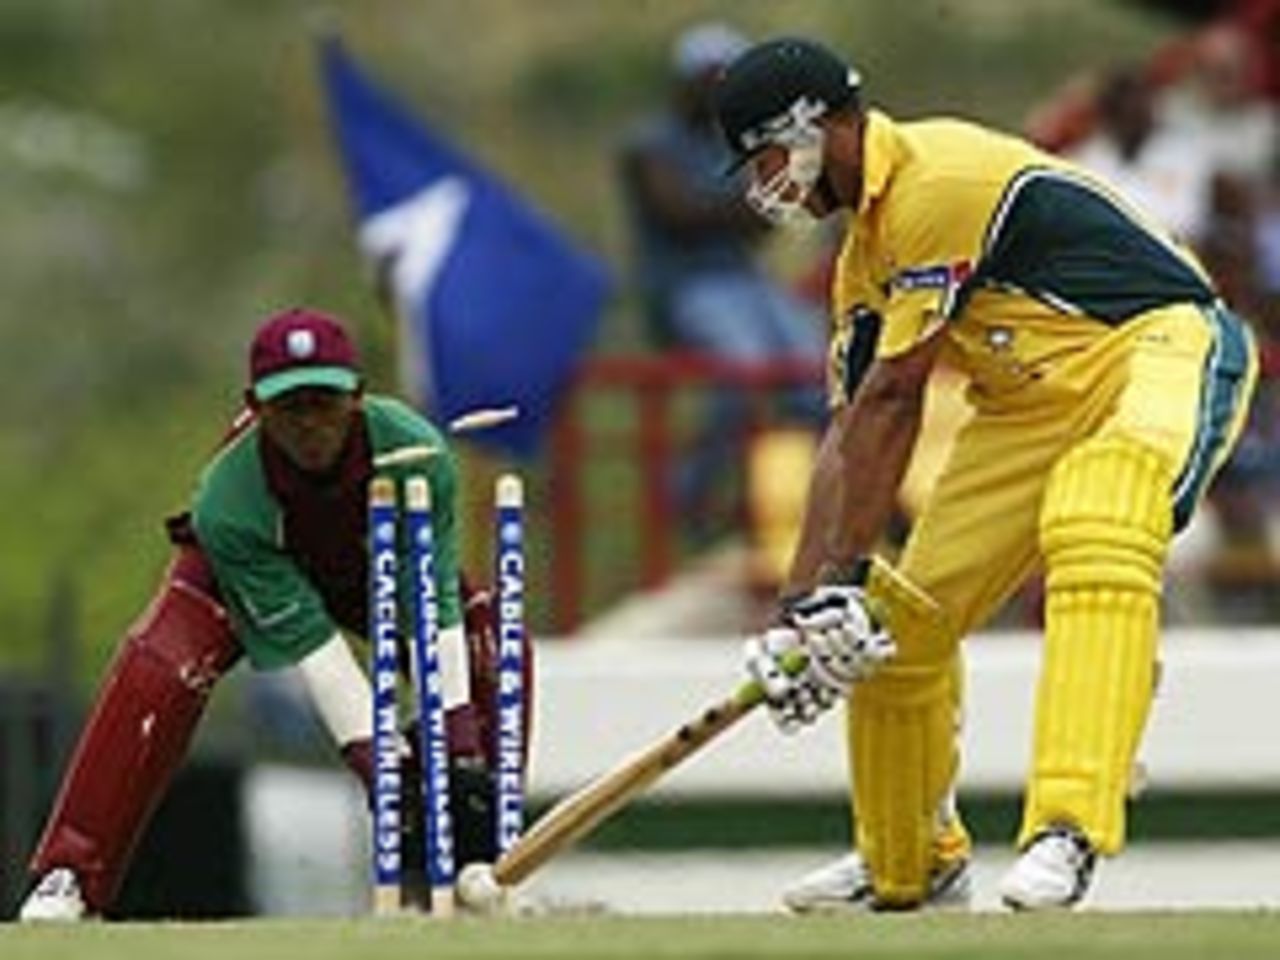 Australia's Andrew Symonds bowled for 75 in the ODI against West Indies in St Lucia